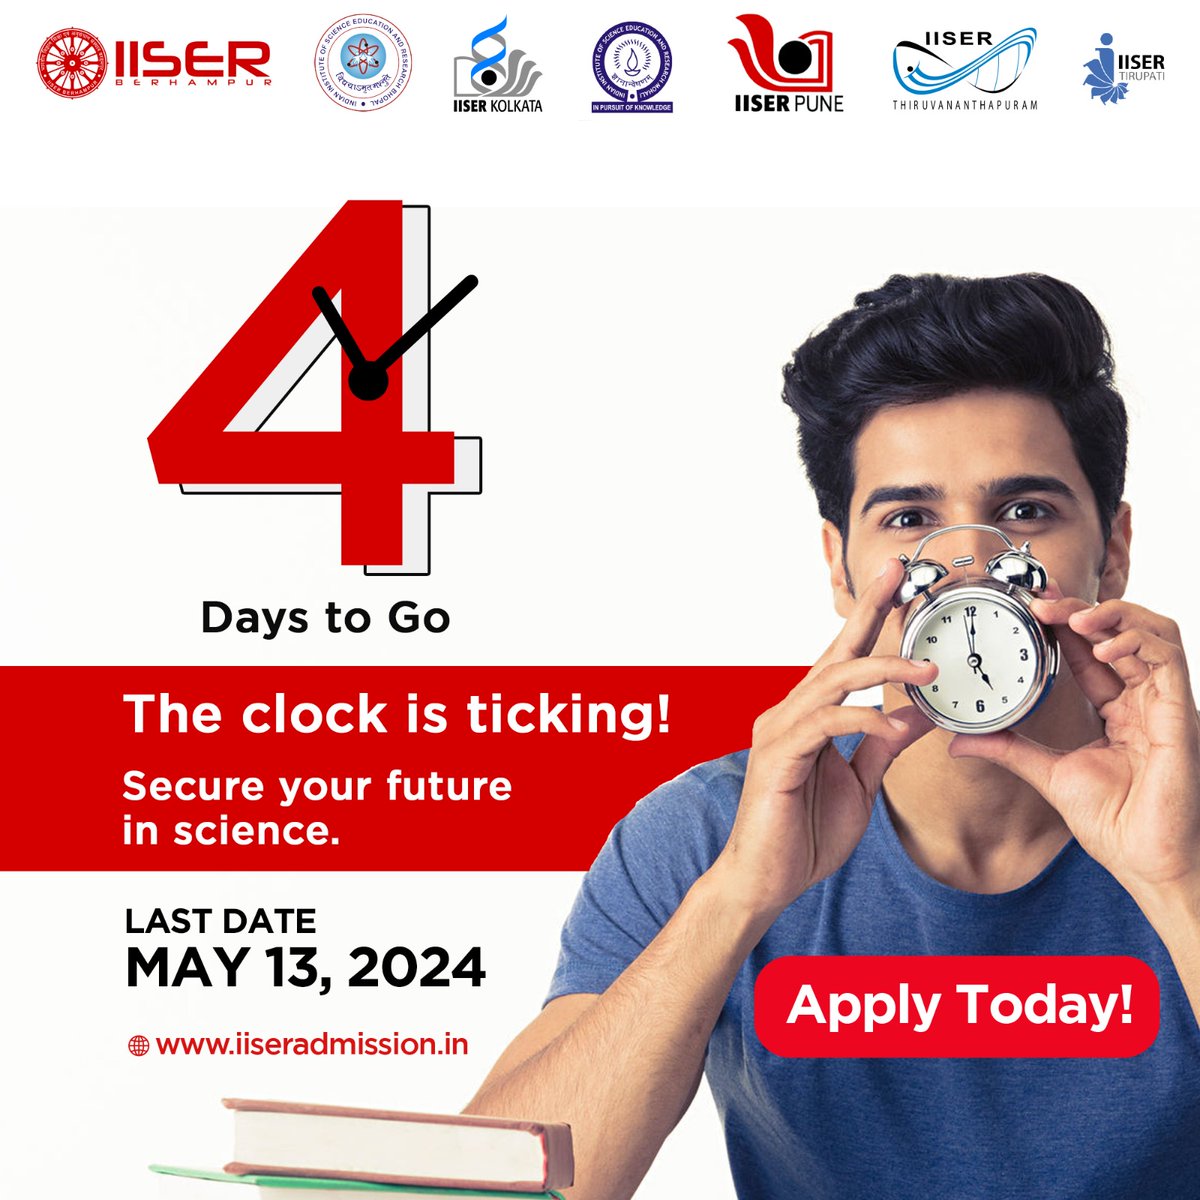 Only 4 days left to seize your opportunity. Apply Now, shape your future, and pave the way for groundbreaking contributions to the scientific community. Apply before 13th May. For more details, visit iiseradmission.in
#IISERs #AdmissionsOpen #IAT2024 #ScienceEducation #BSMS